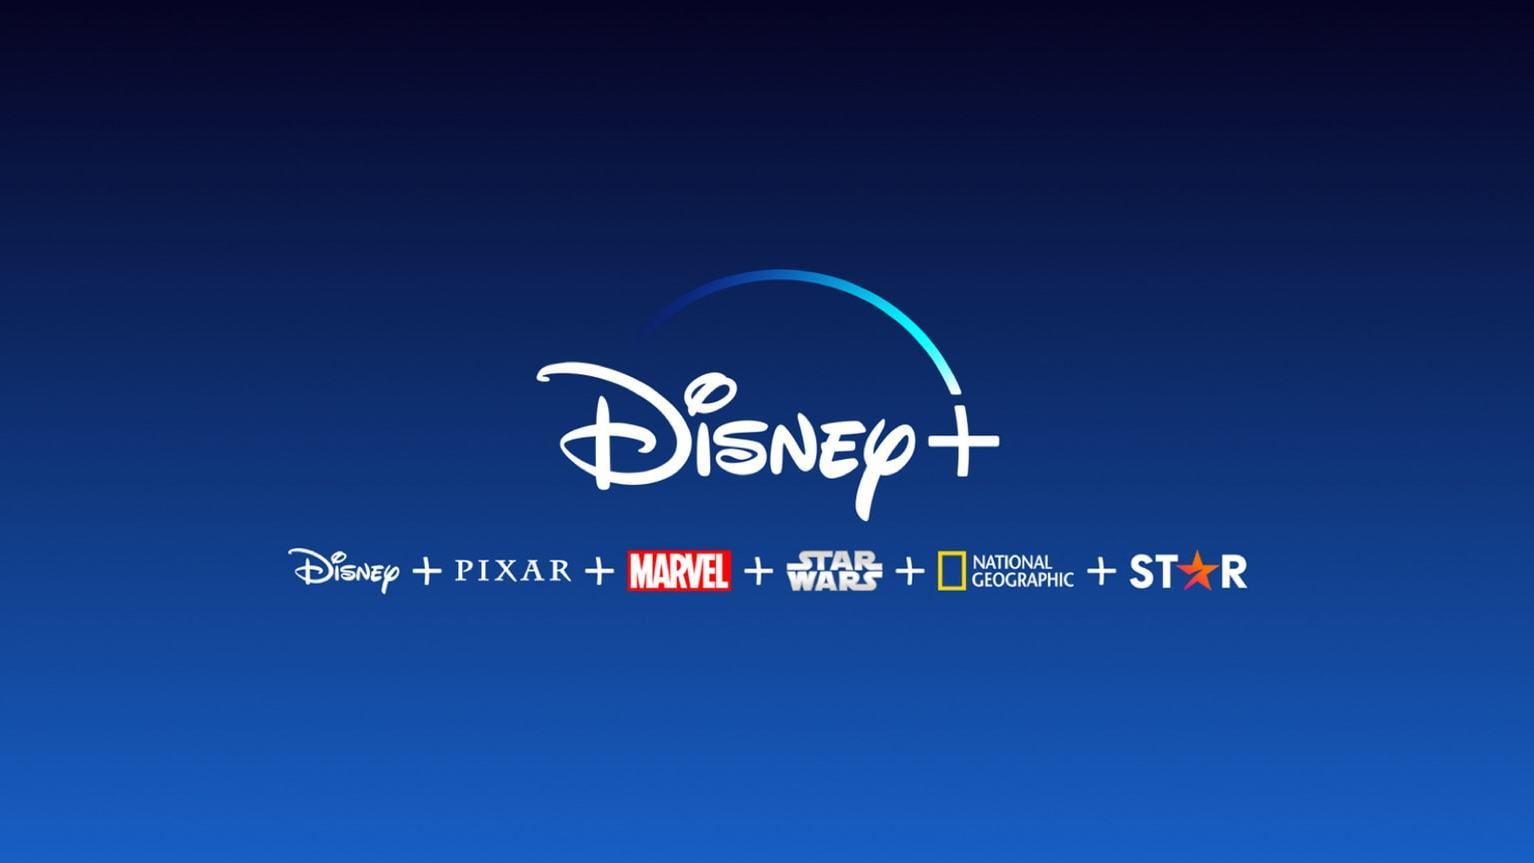 DISNEY+ CONFIRMS 42 COUNTRIES TO LAUNCH IN EUROPE, MIDDLE EAST AND AFRICA  THIS SUMMER | UK Press